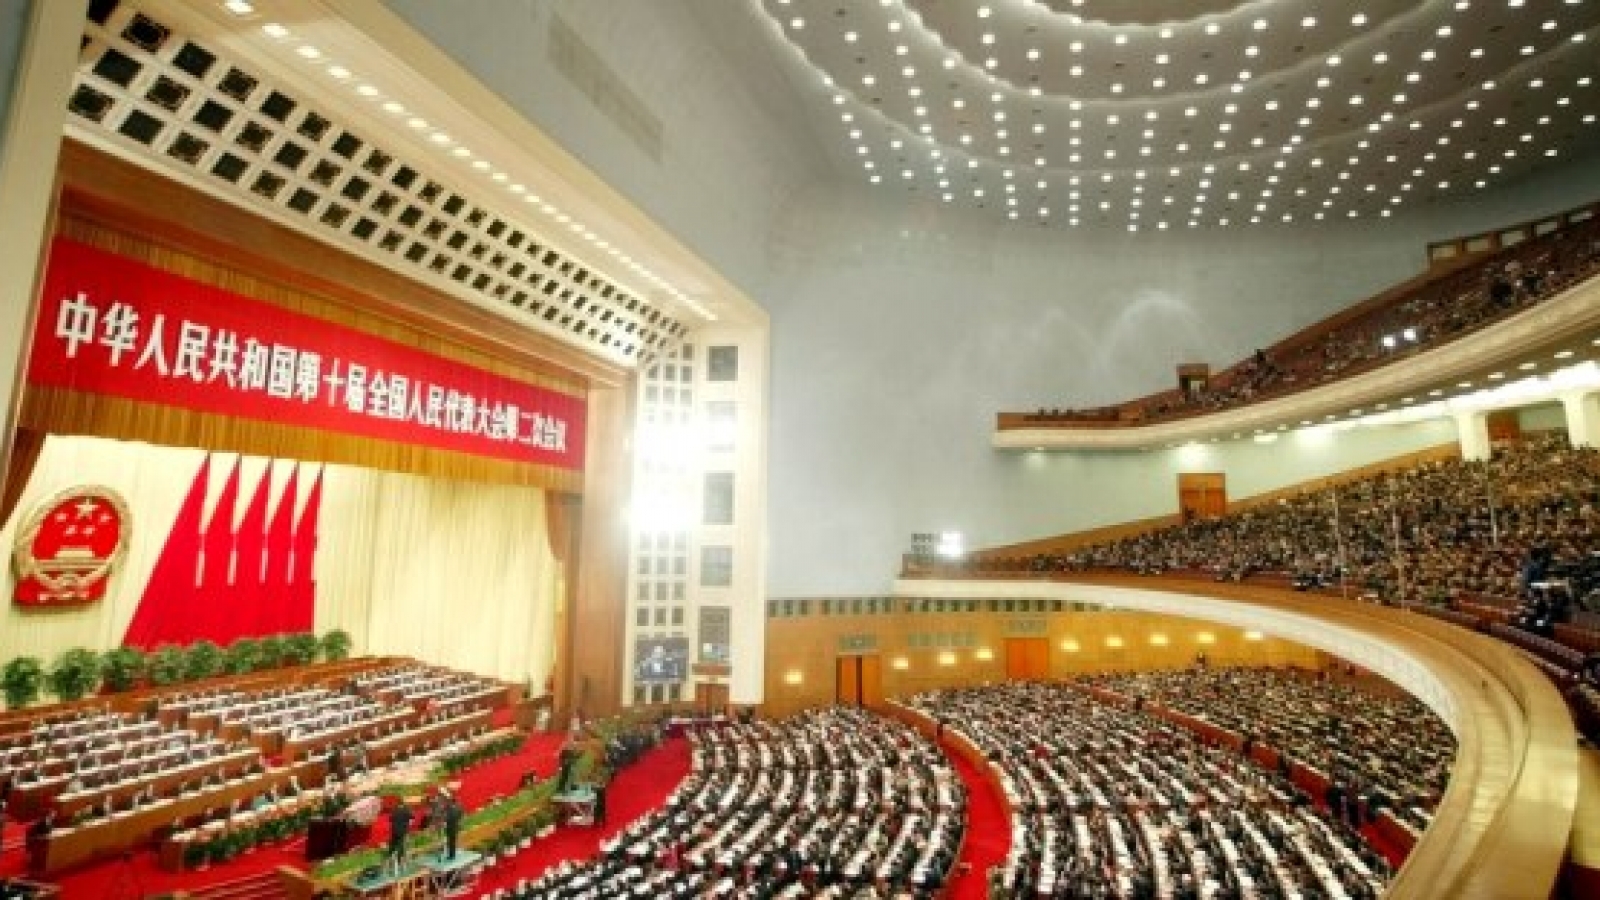 Great Hall Of The People - HD Wallpaper 